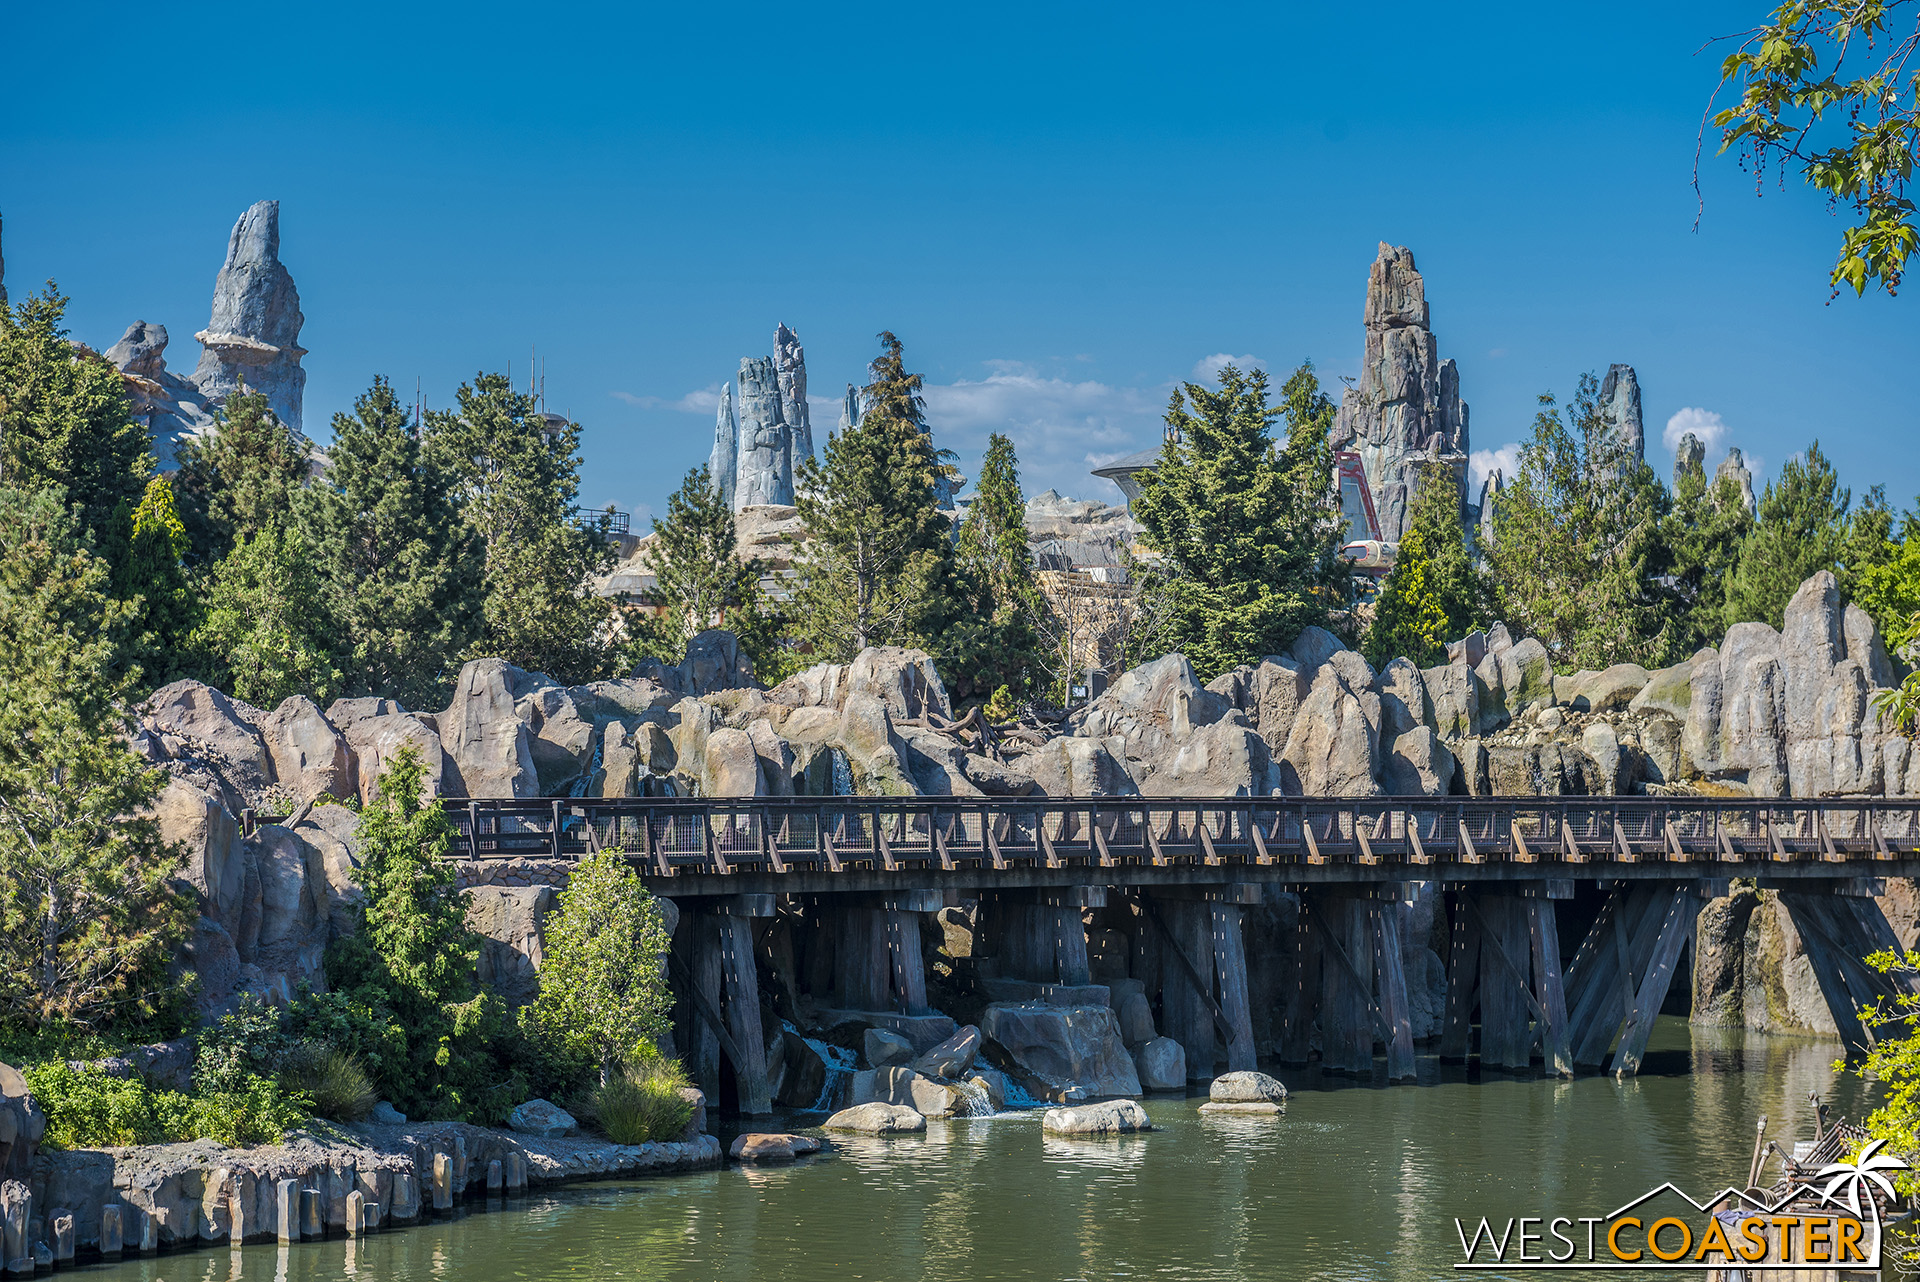  But the spires of Batuu look great from the Rivers of America! 